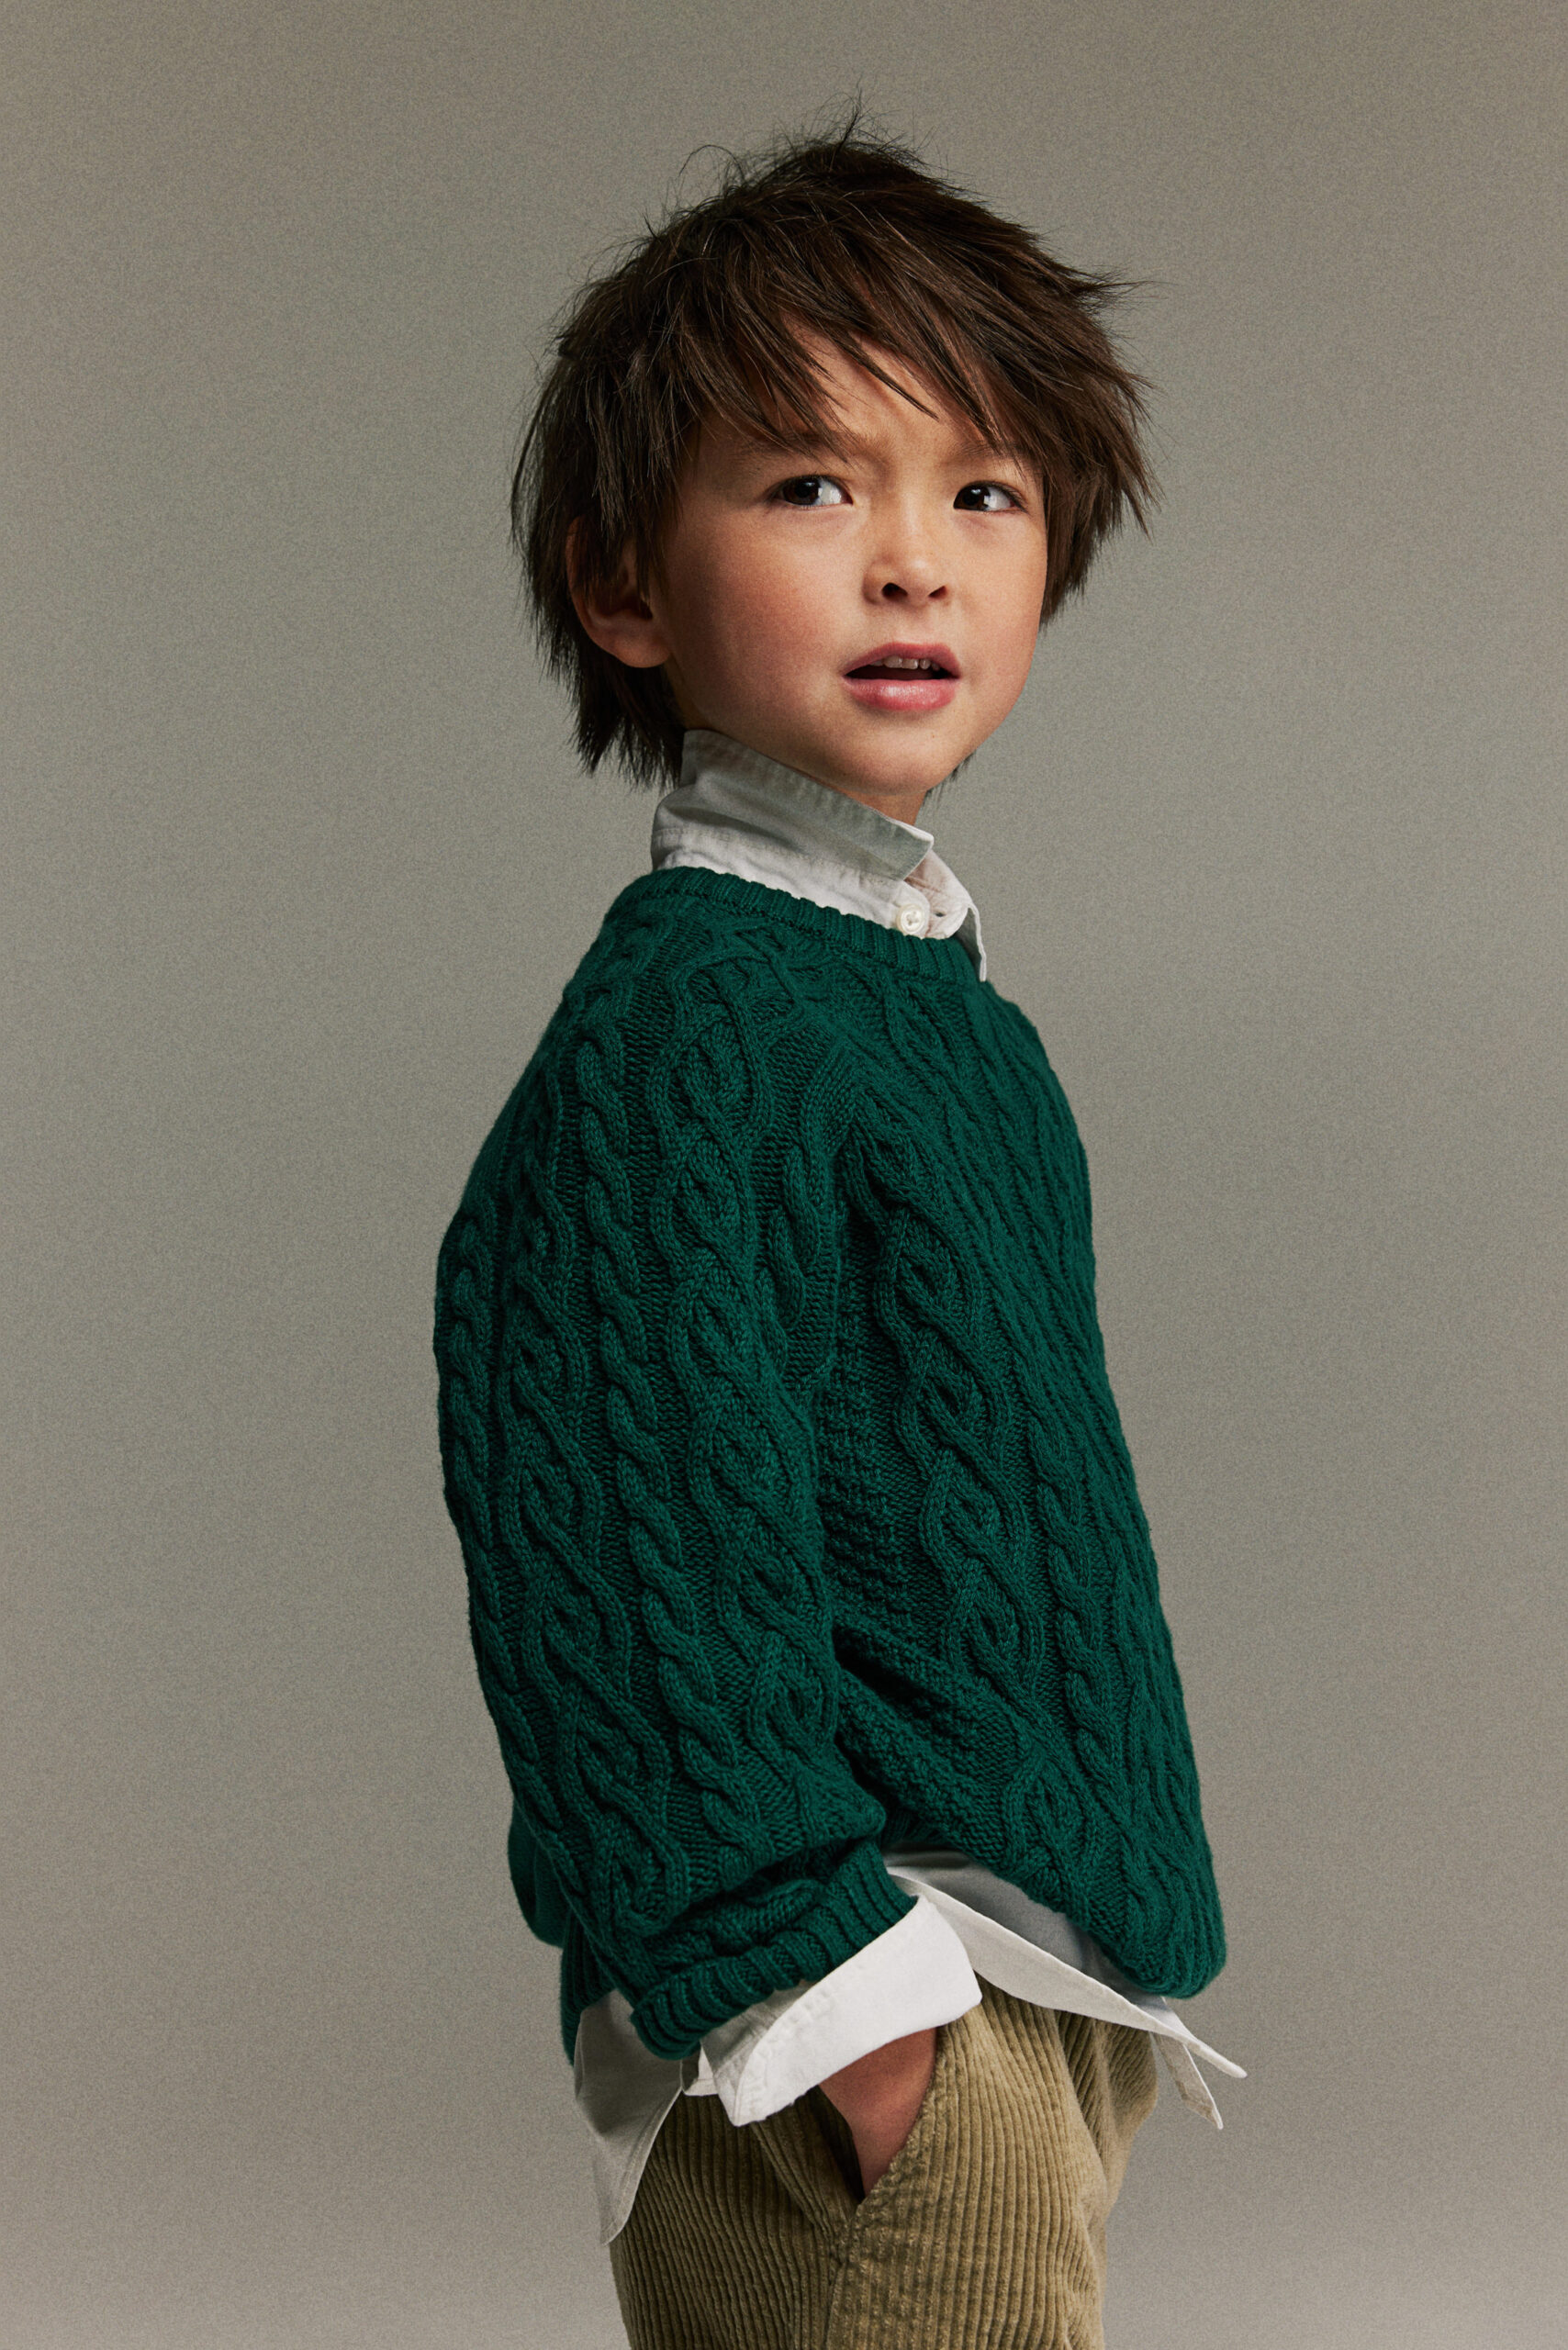 boy wearing green knit sweater over a button up shirt with corduroy pants